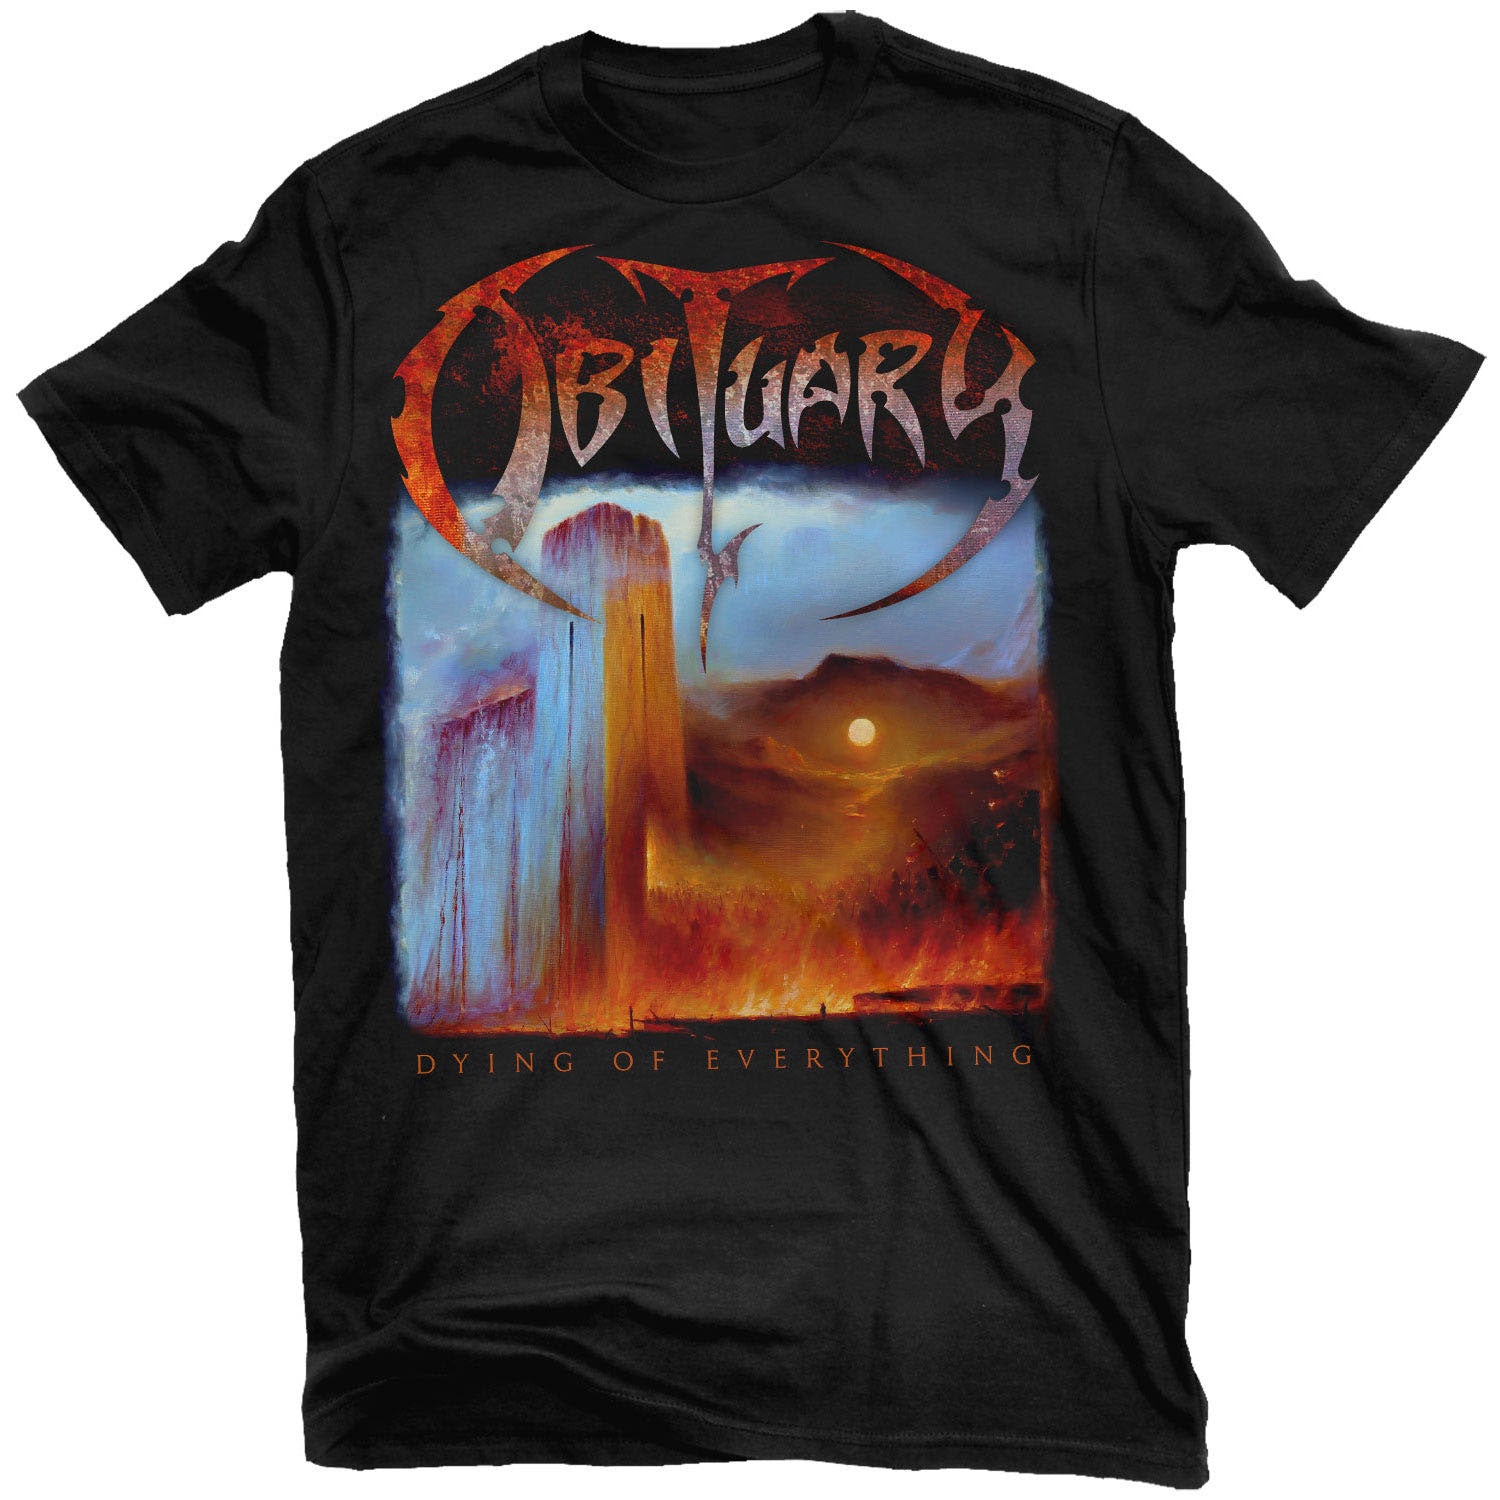 Obituary "Dying of Everything" T-Shirt